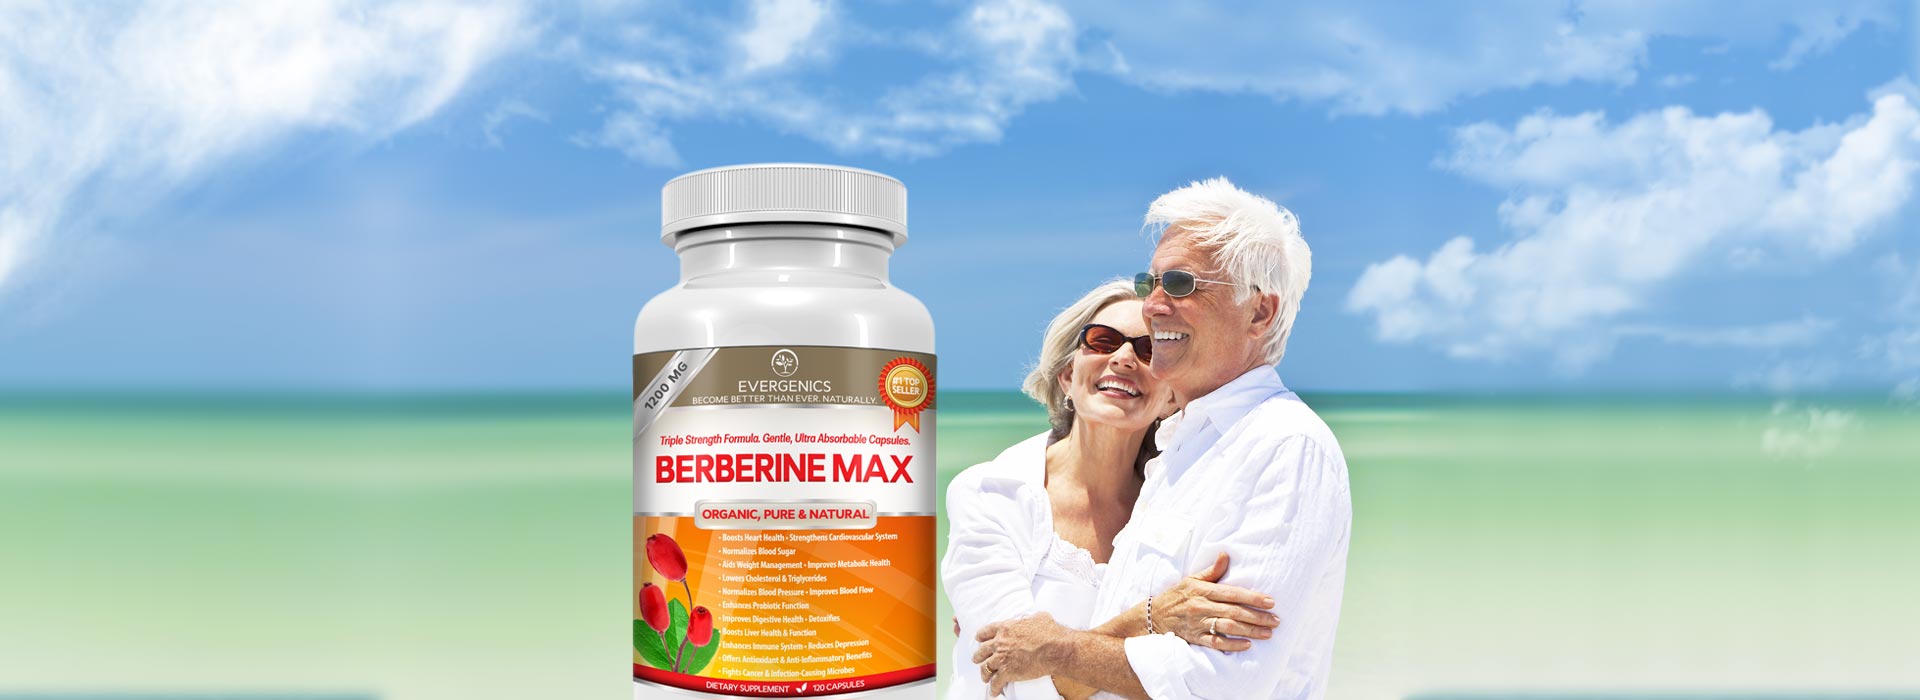 Berberine Max HCl Supplement for Improved Health in Nearly All Areas 